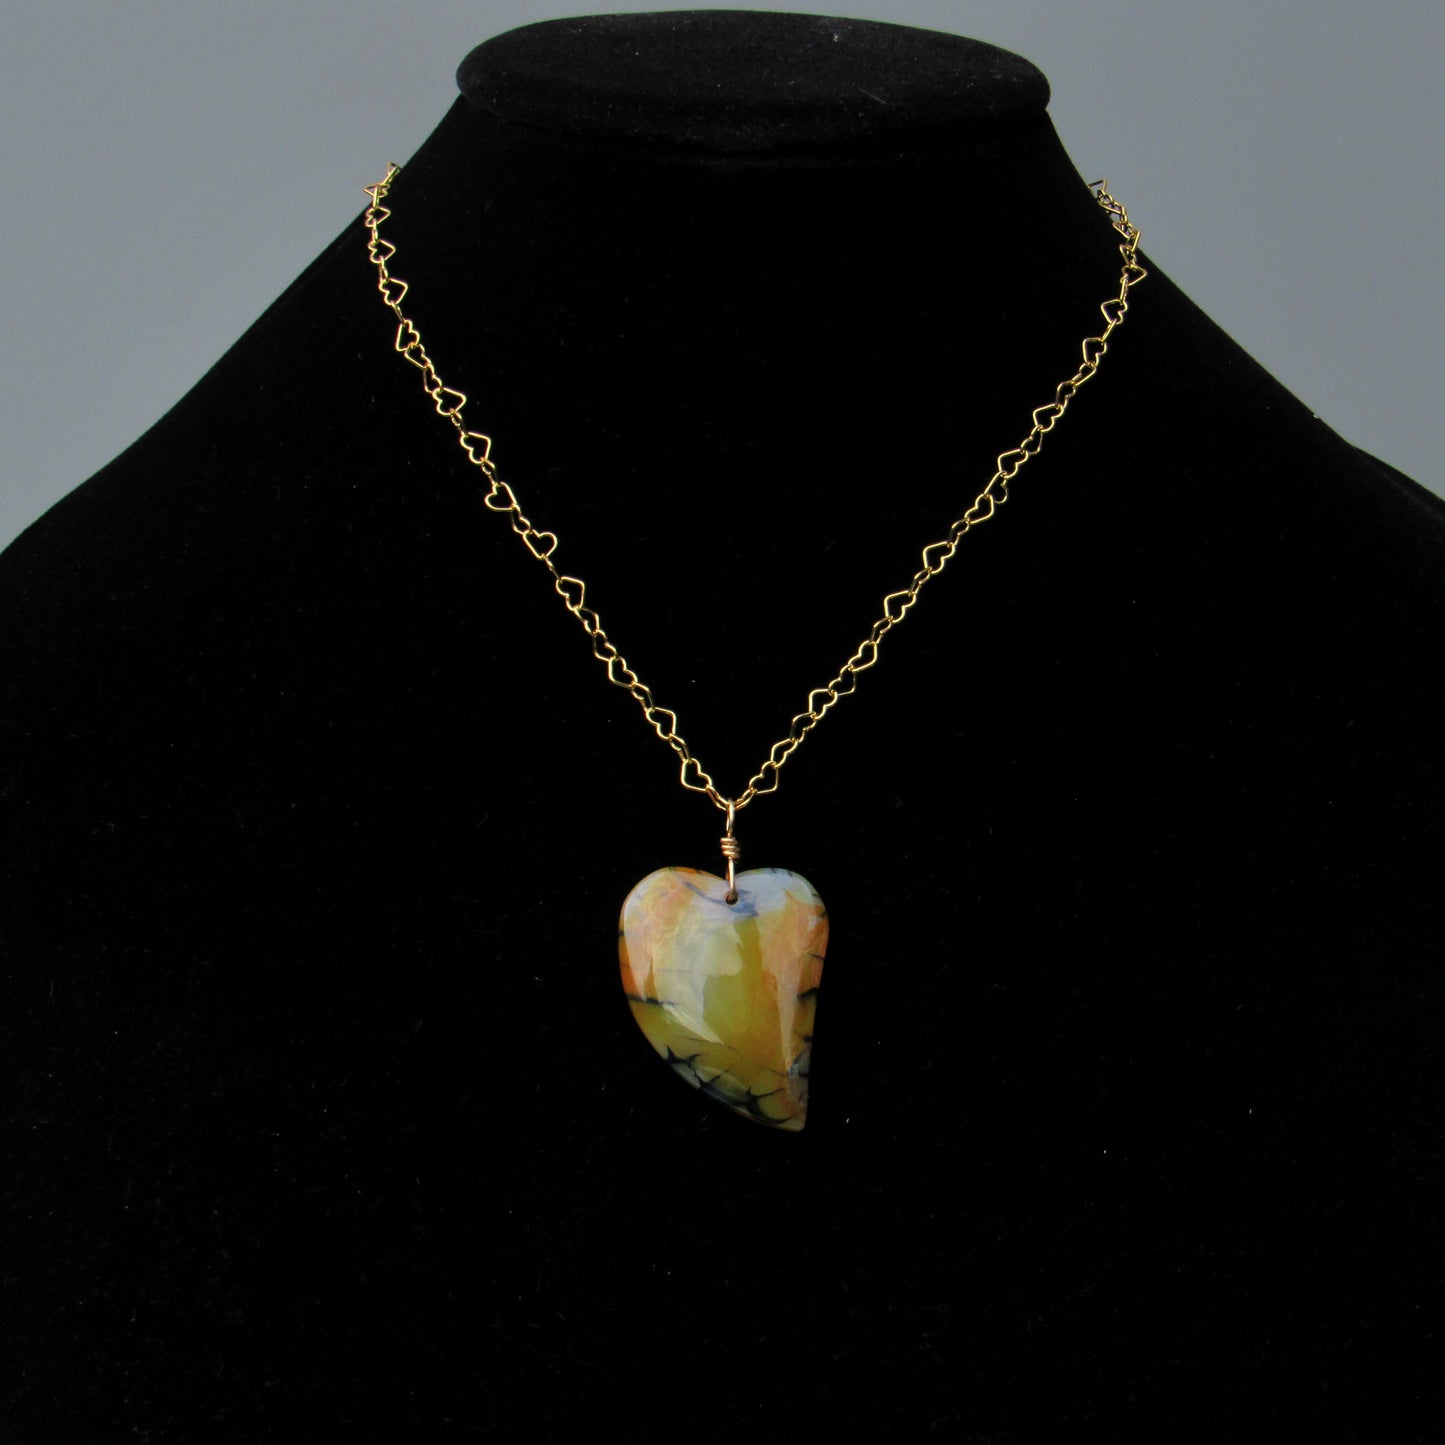 Dragon’s Vein Agate gemstone heart on gold heart chain necklace